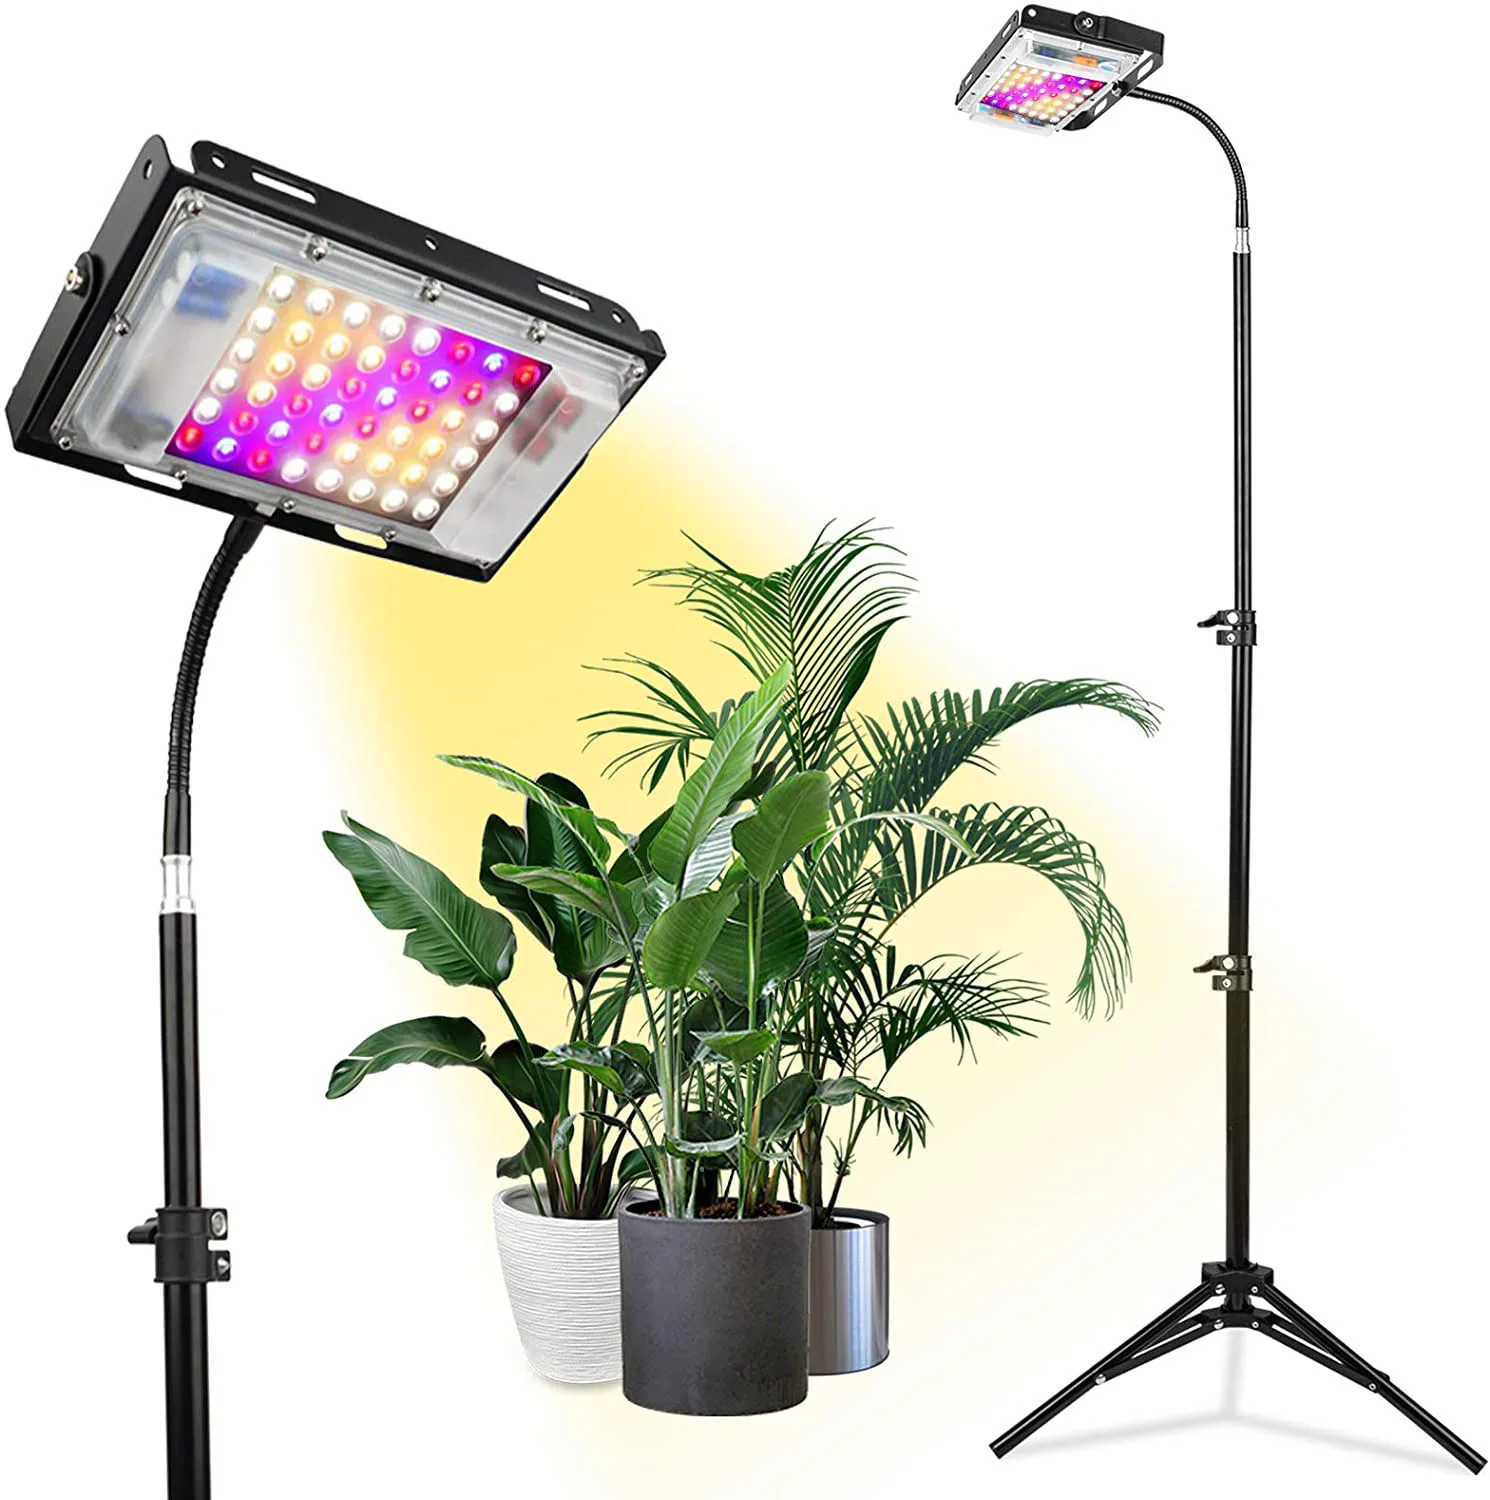 Full Spectrum 150W Plant Grow Light with Stand 7000 lx for Indoor Plants Growth